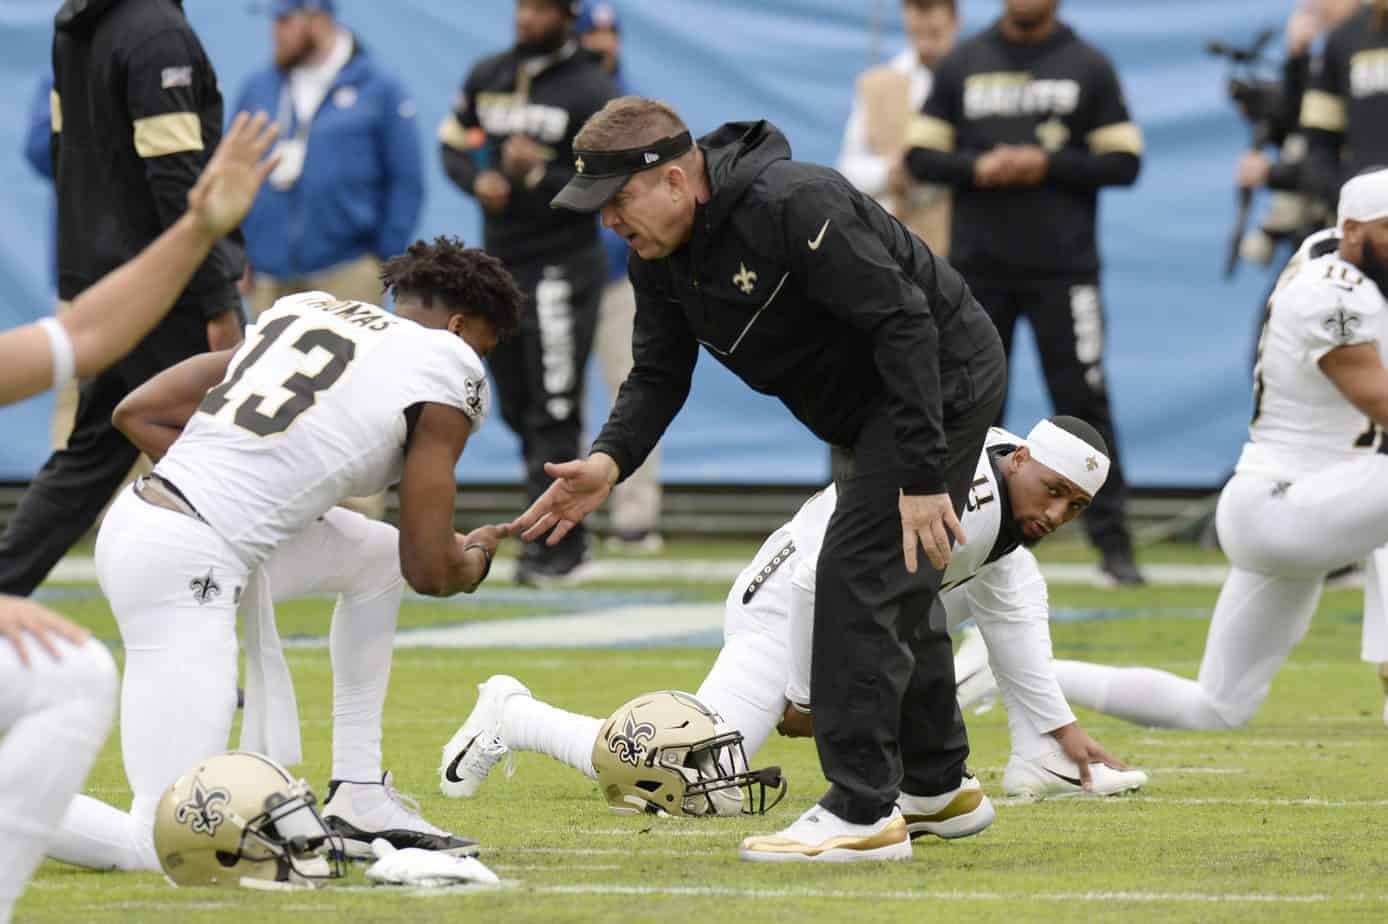 New Orleans Saints receiver Michael Thomas reacted to the surprise news that Sean Payton was retiring after a long time at the helm